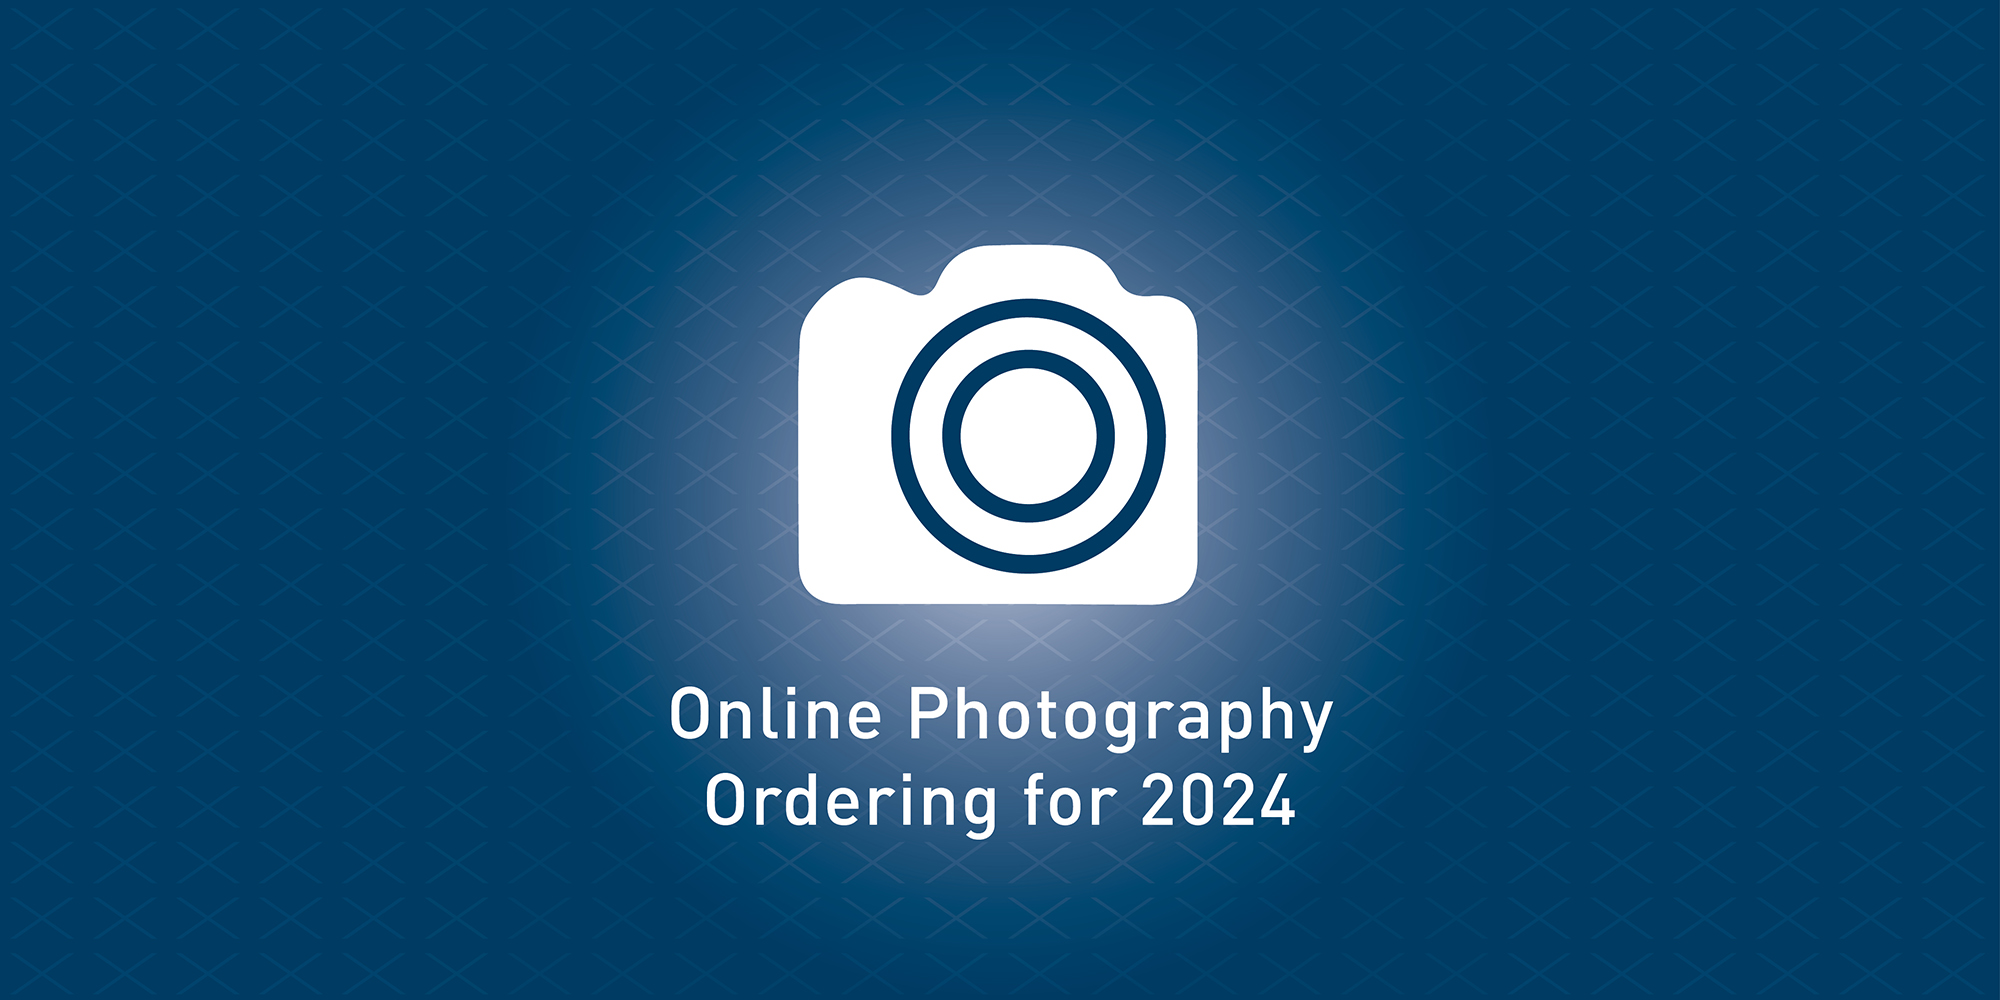 Online Photography 2024